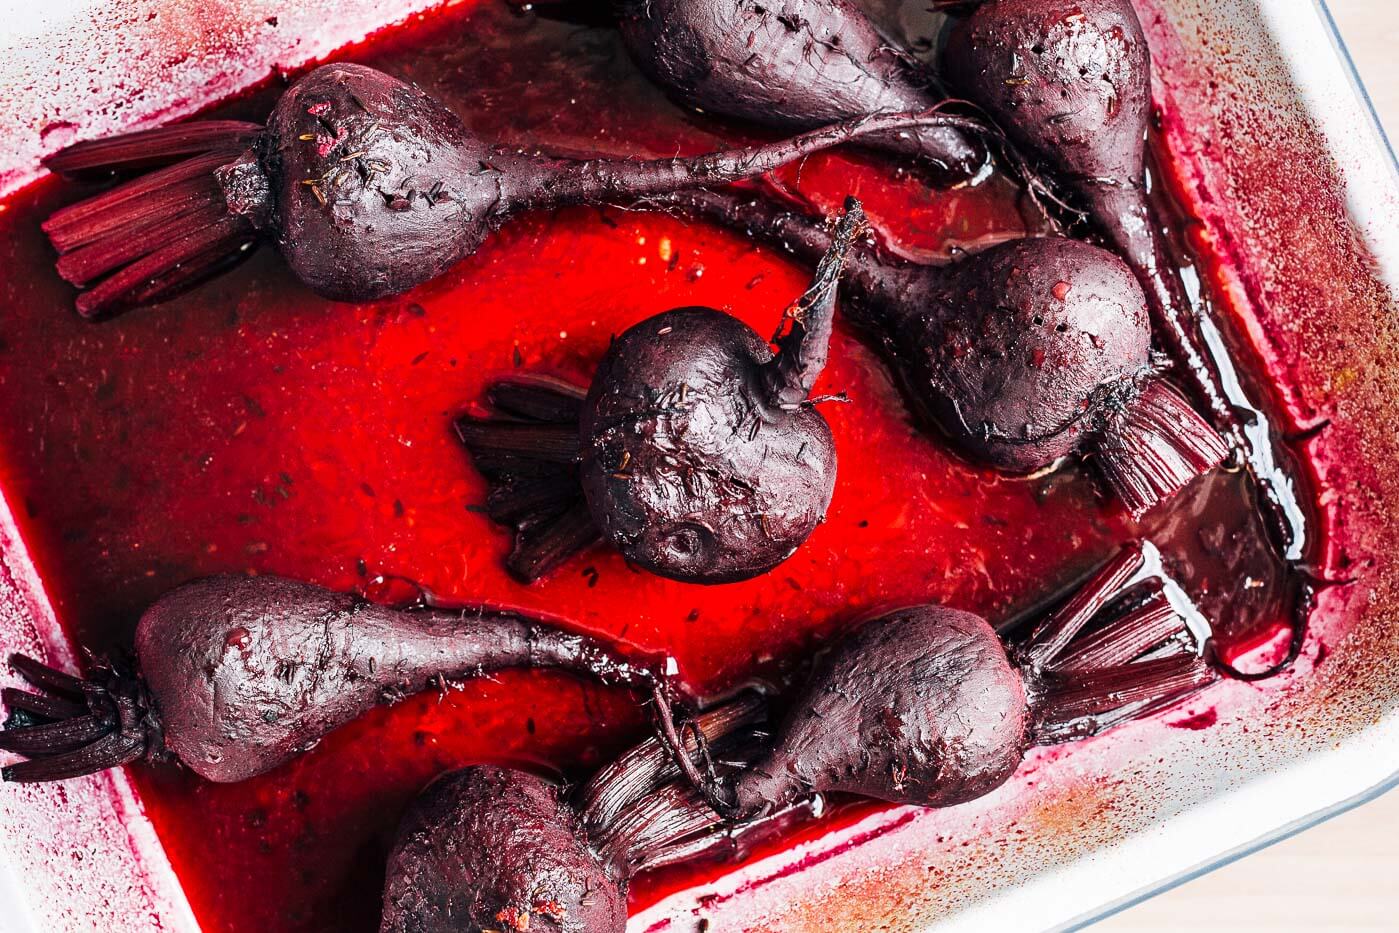 Oven steamed beets